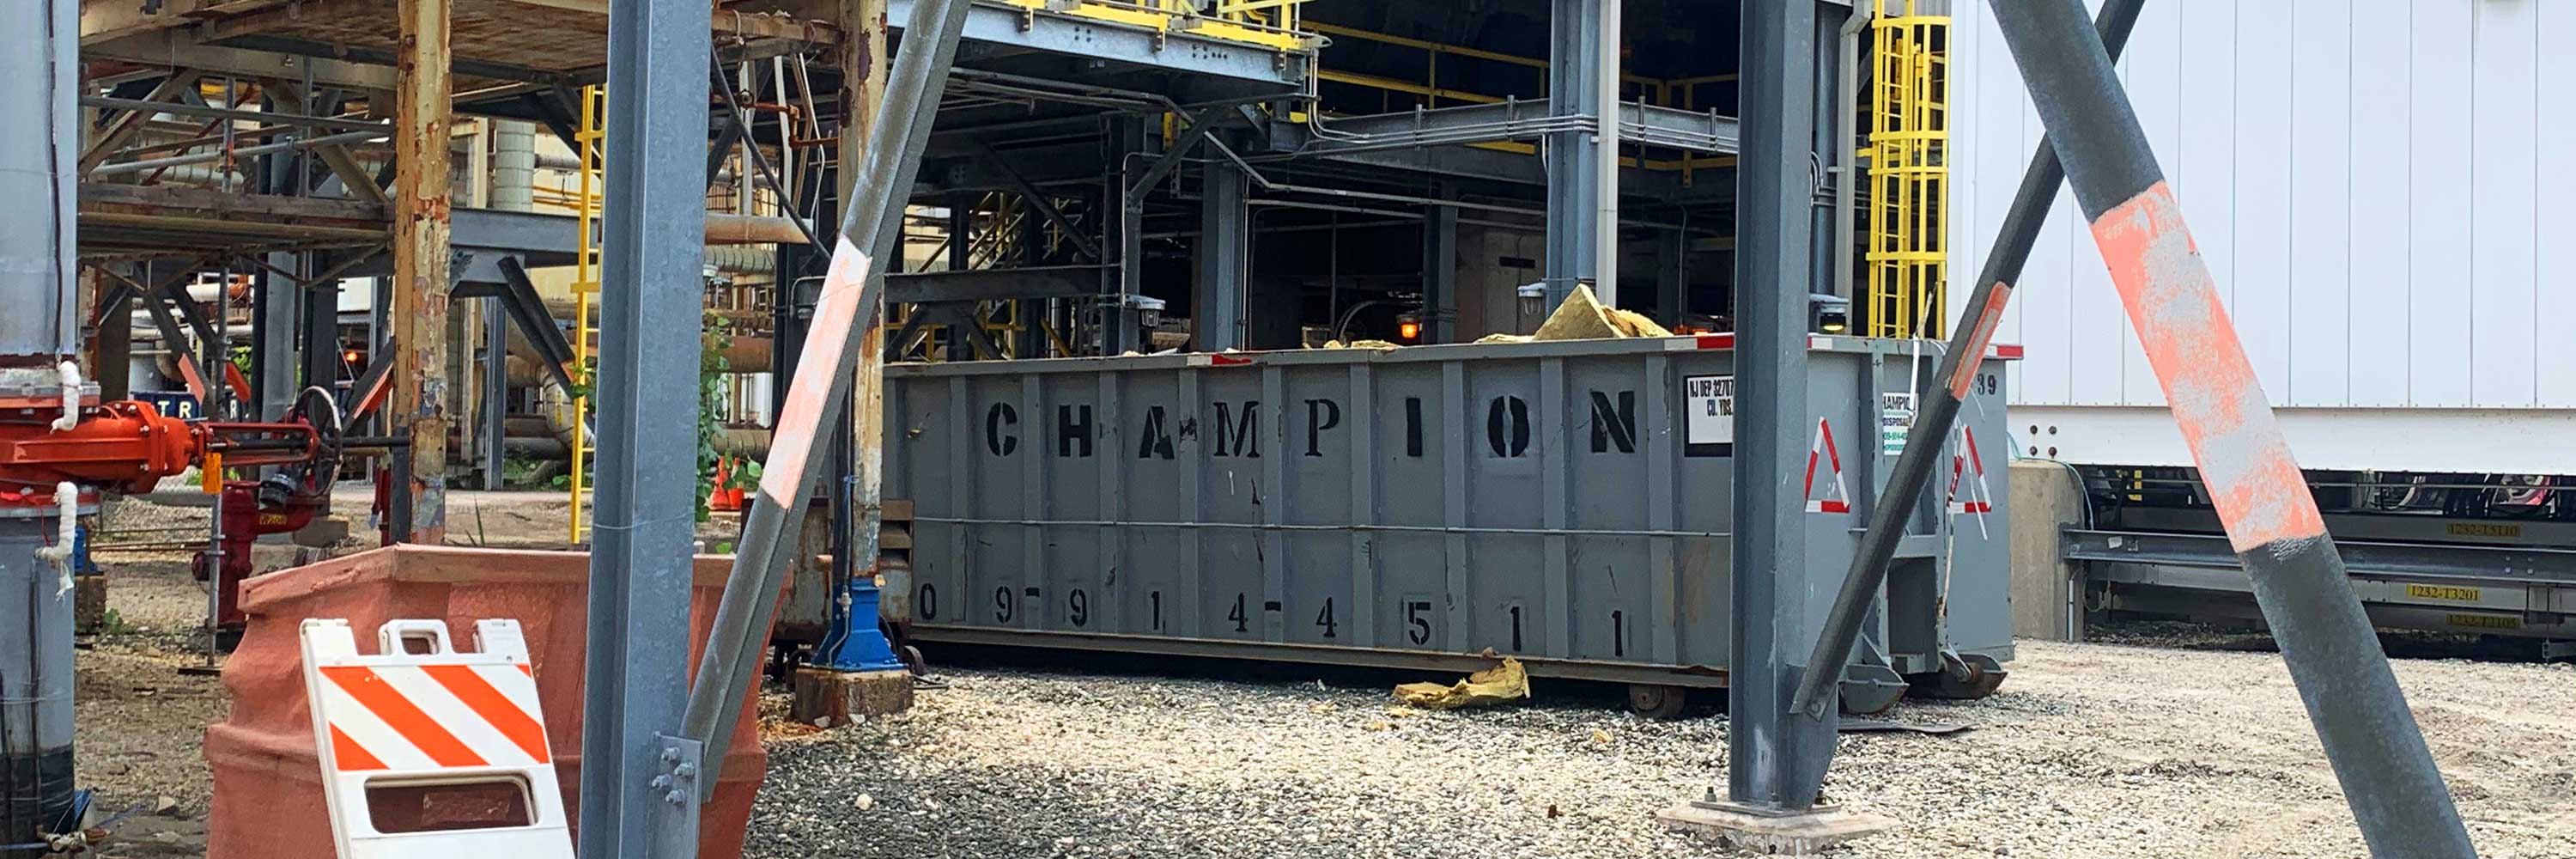 Photo of a Champion dumpster